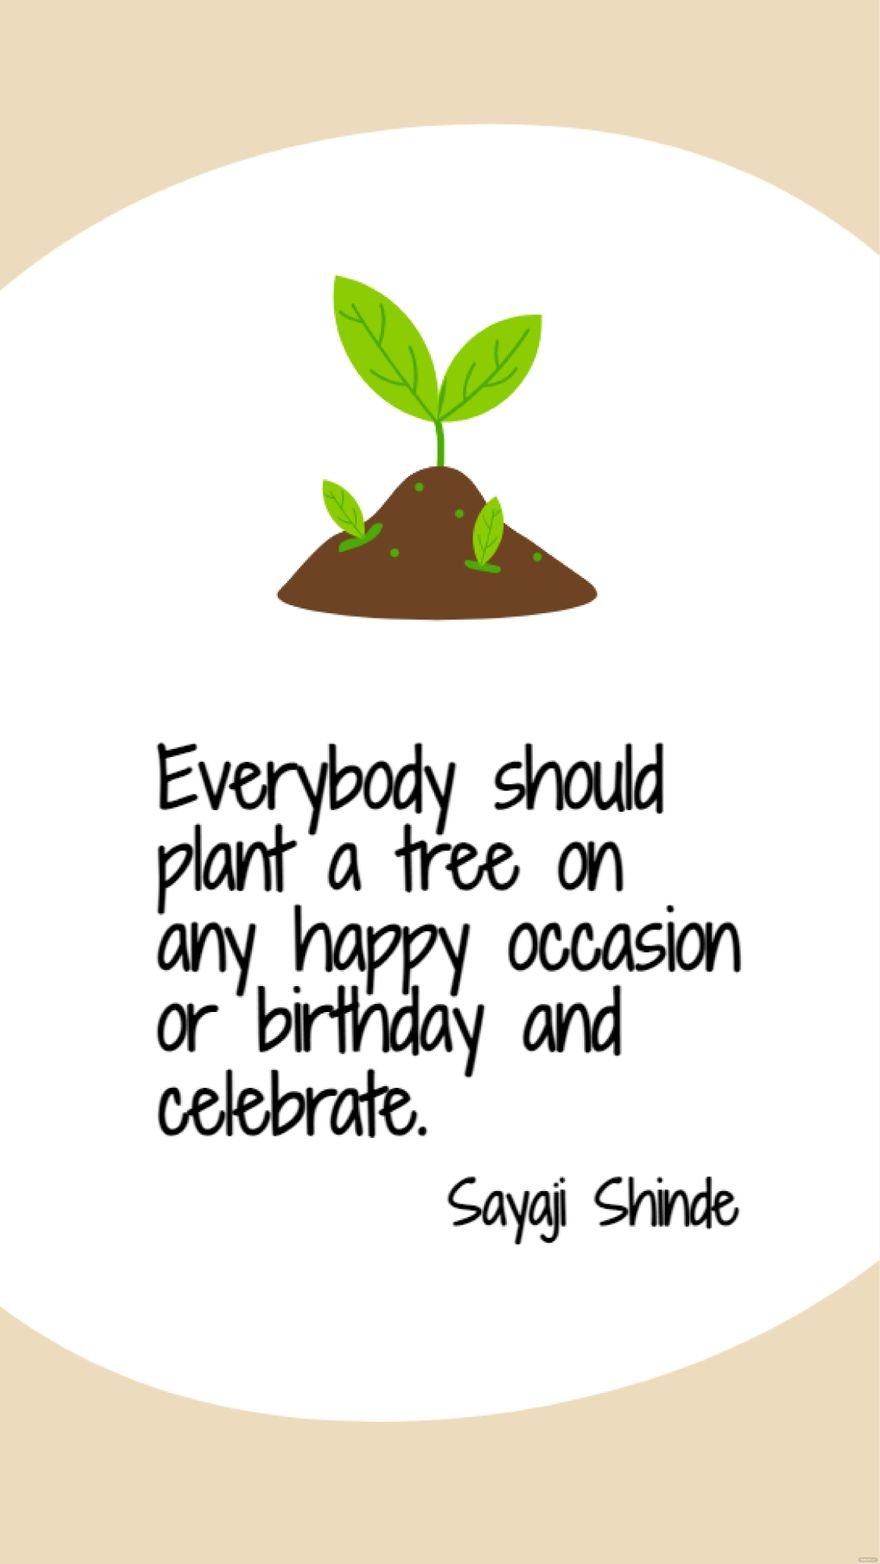 Sayaji Shinde - Everybody should plant a tree on any happy occasion or birthday and celebrate. in JPG